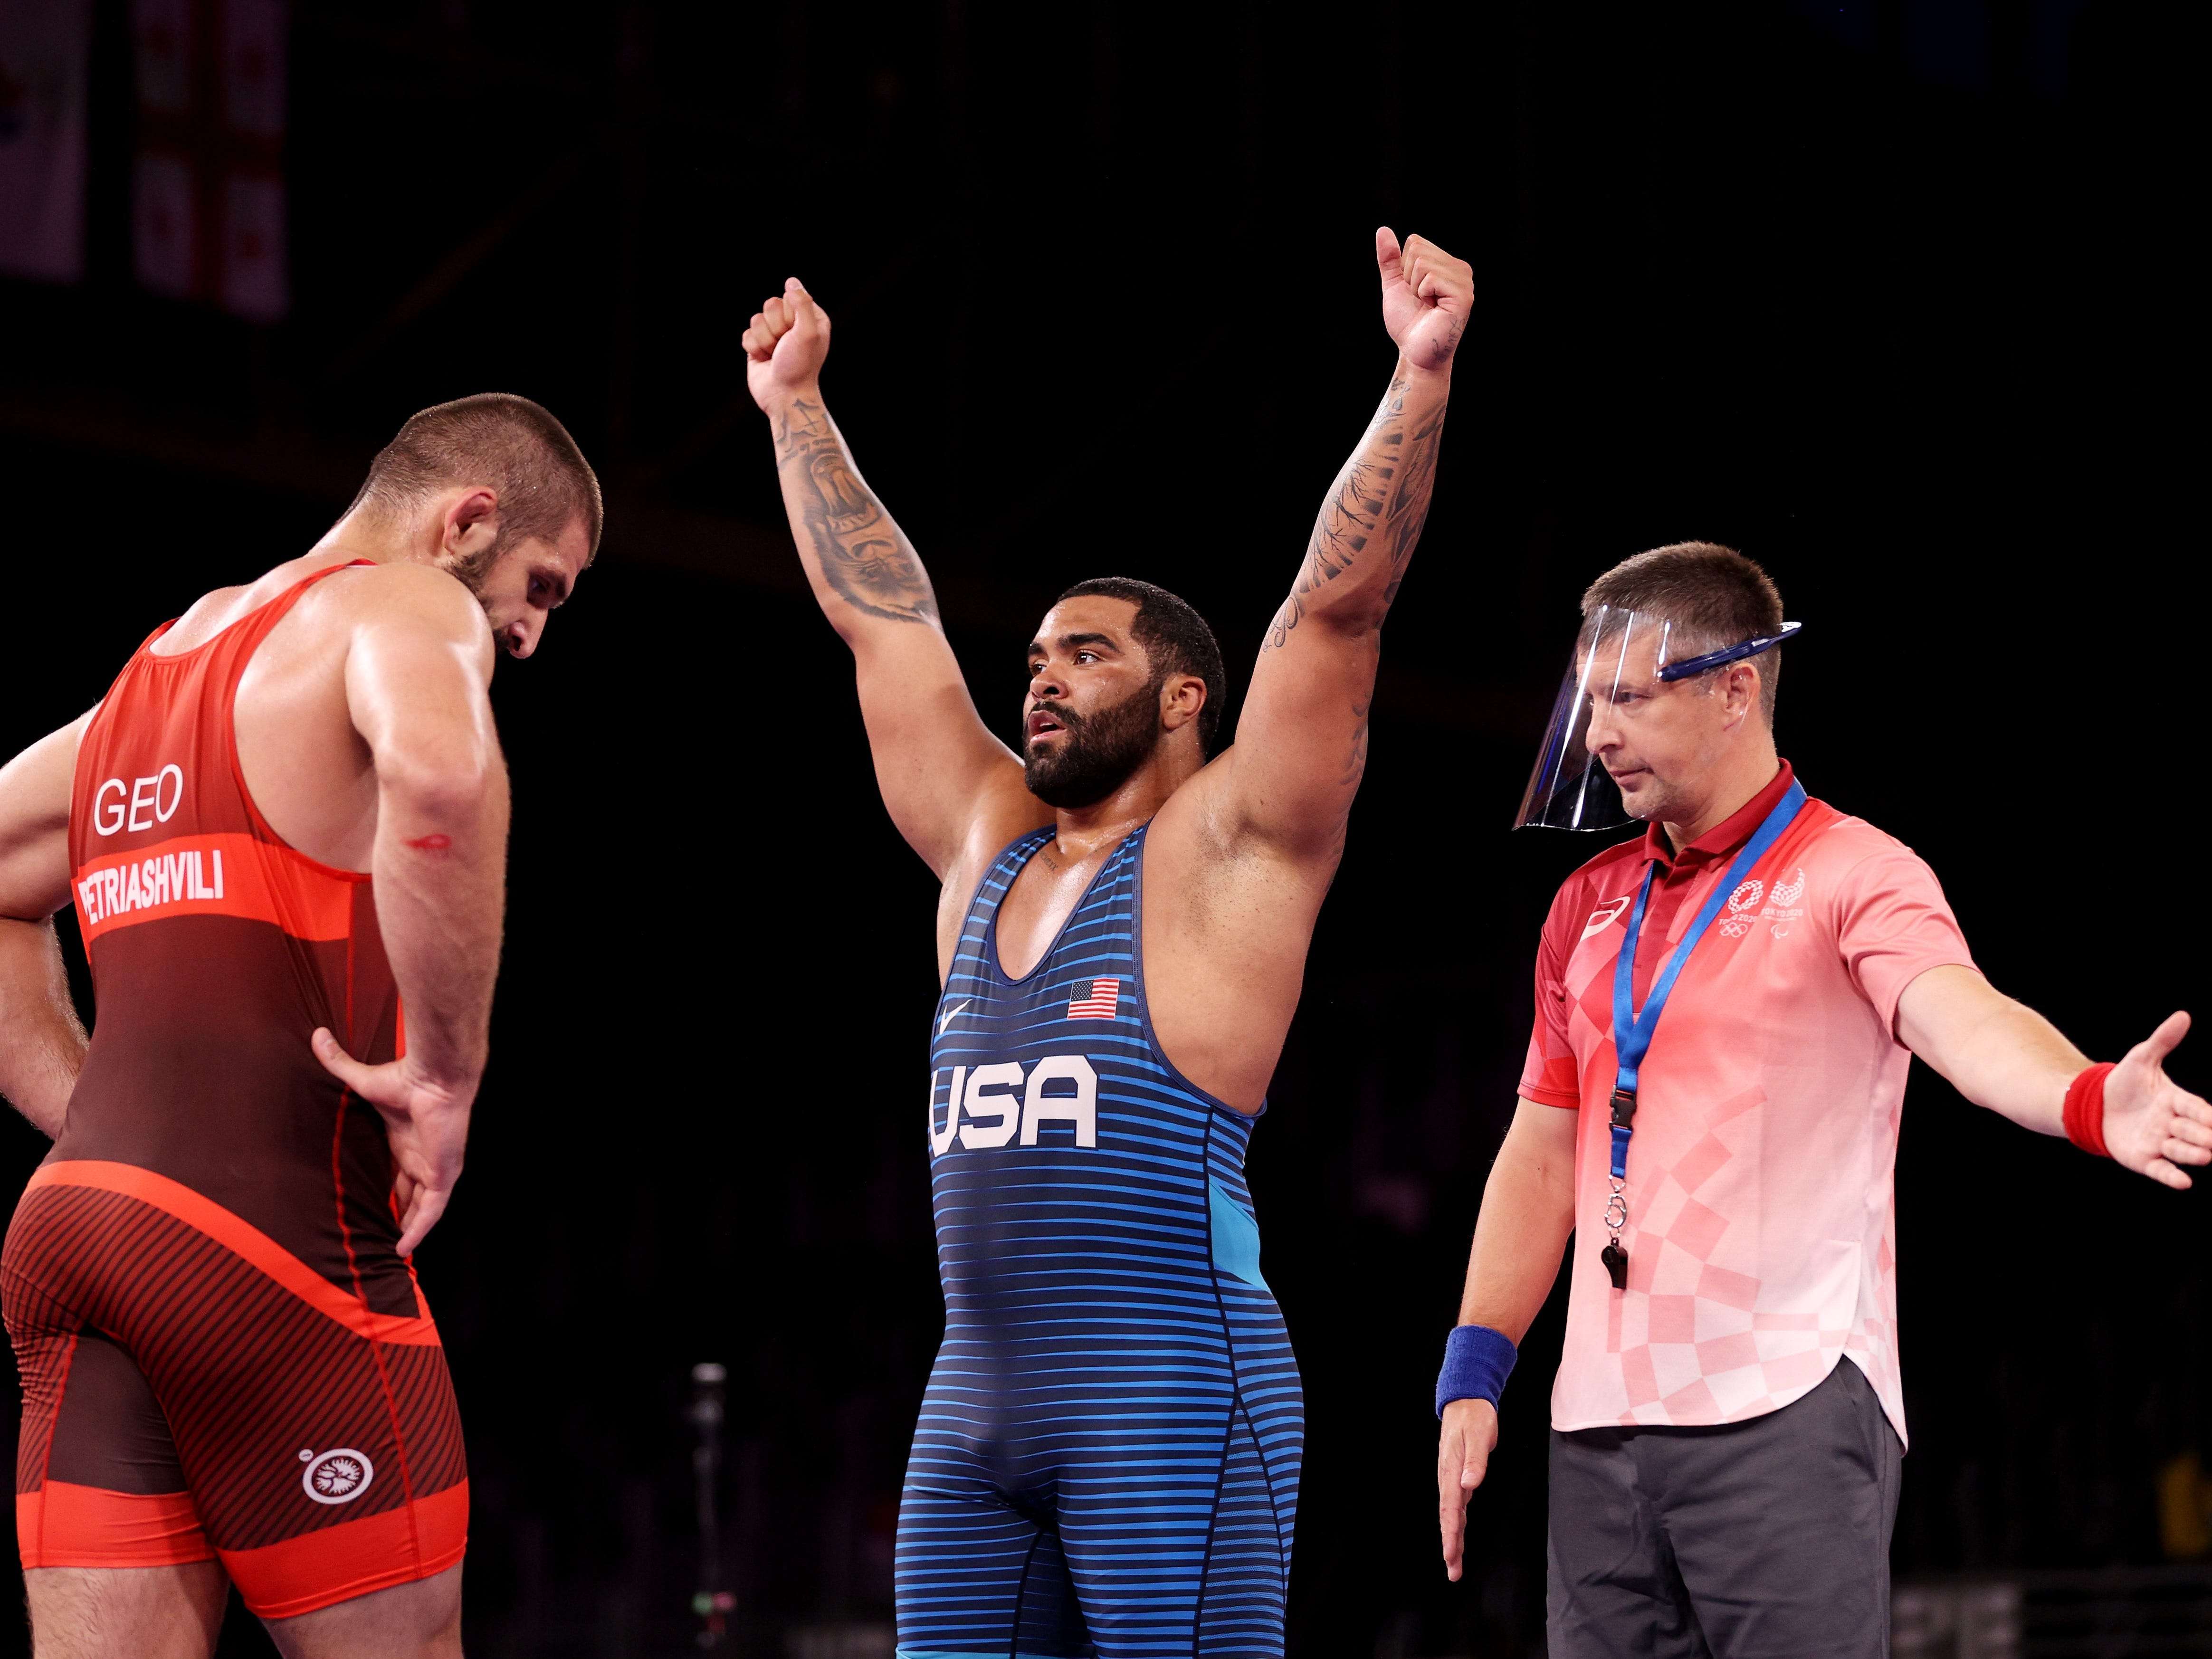 A Us Wrestling Heavyweight Pulled Off A Last Second Miracle To Win Gold At The Olympics ?imgsize=950103